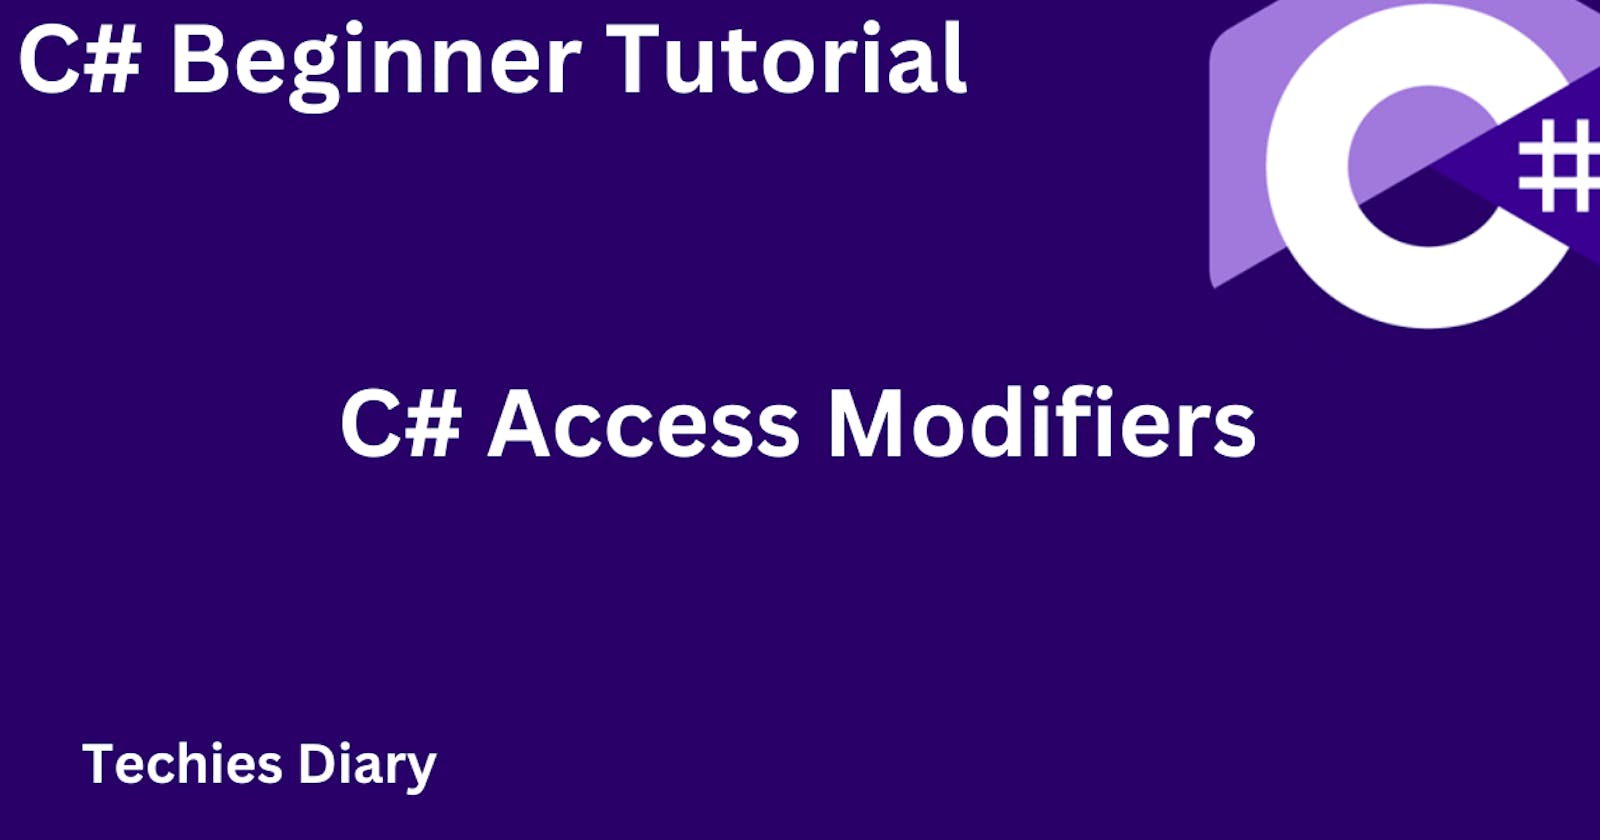 A Beginner's Guide to C# Access Modifiers: Learn the Basics